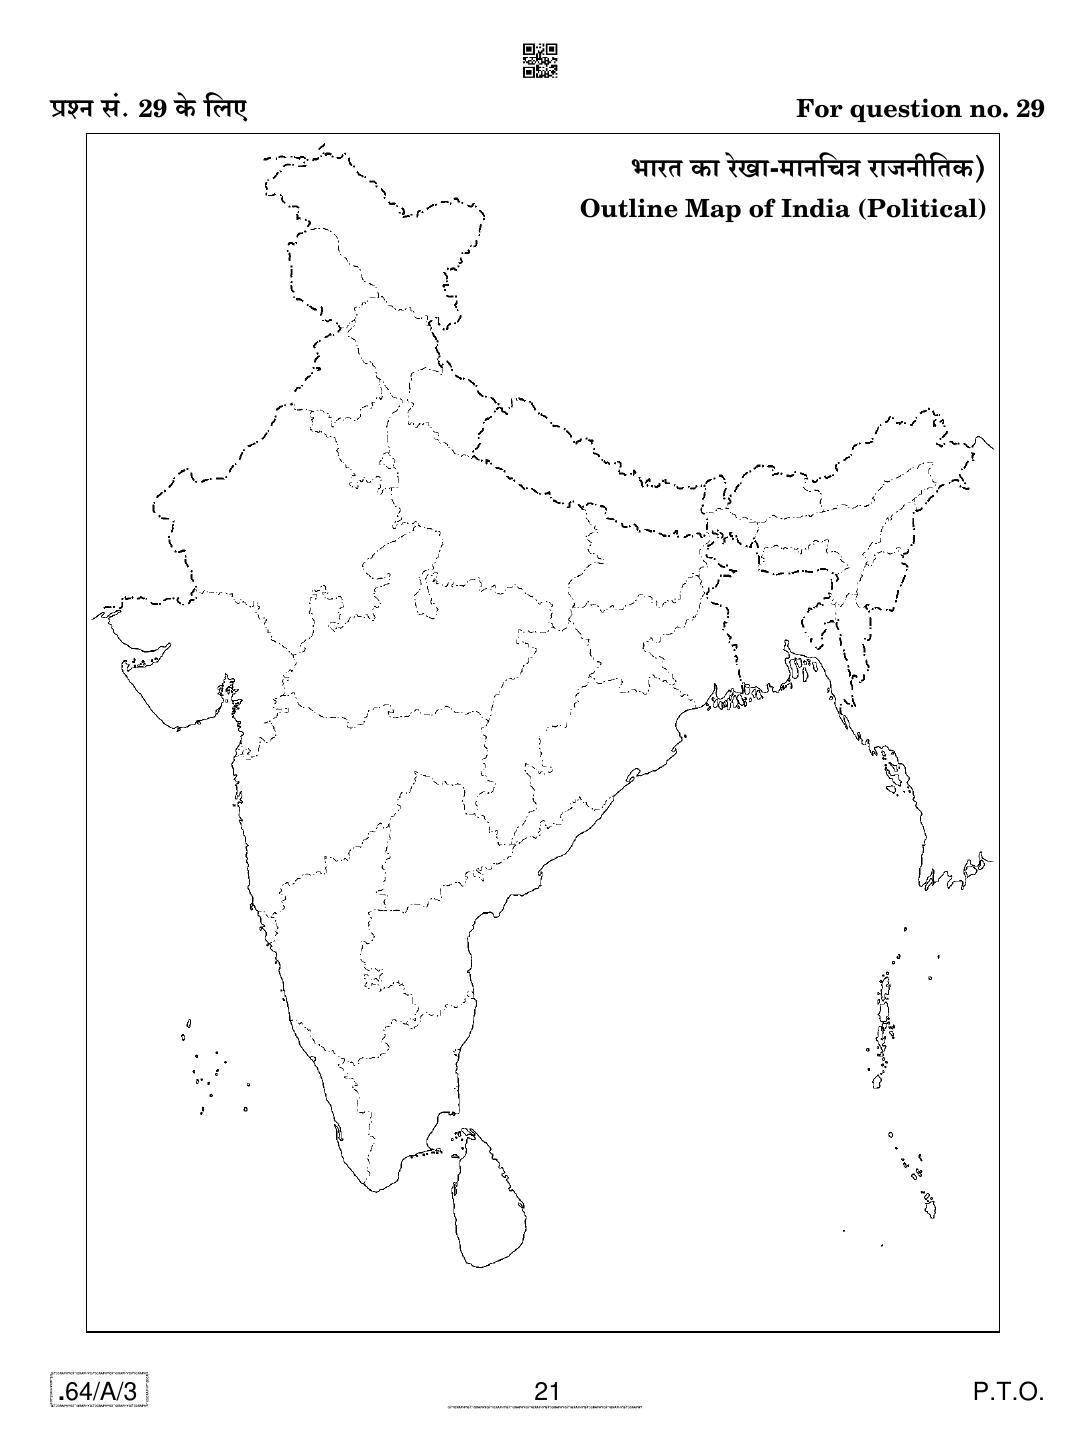 CBSE Class 12 64-C-3 - Geography 2020 Compartment Question Paper - Page 21